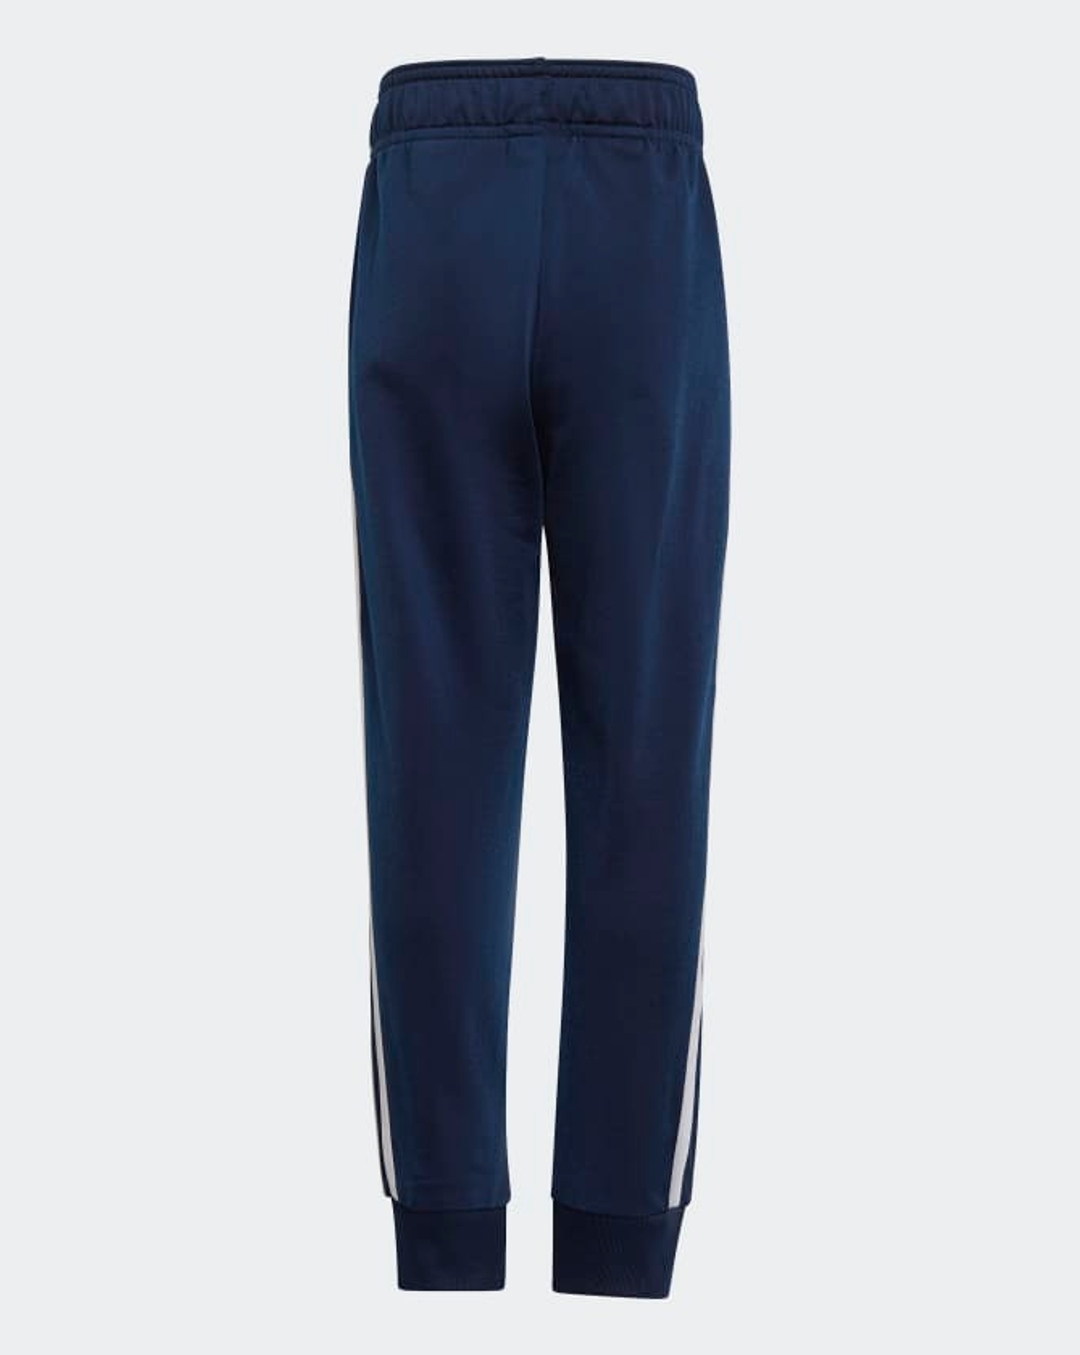 Adidas Originals Superstar Cuffed Track Pants Navy/Red,tracksuit,bottoms